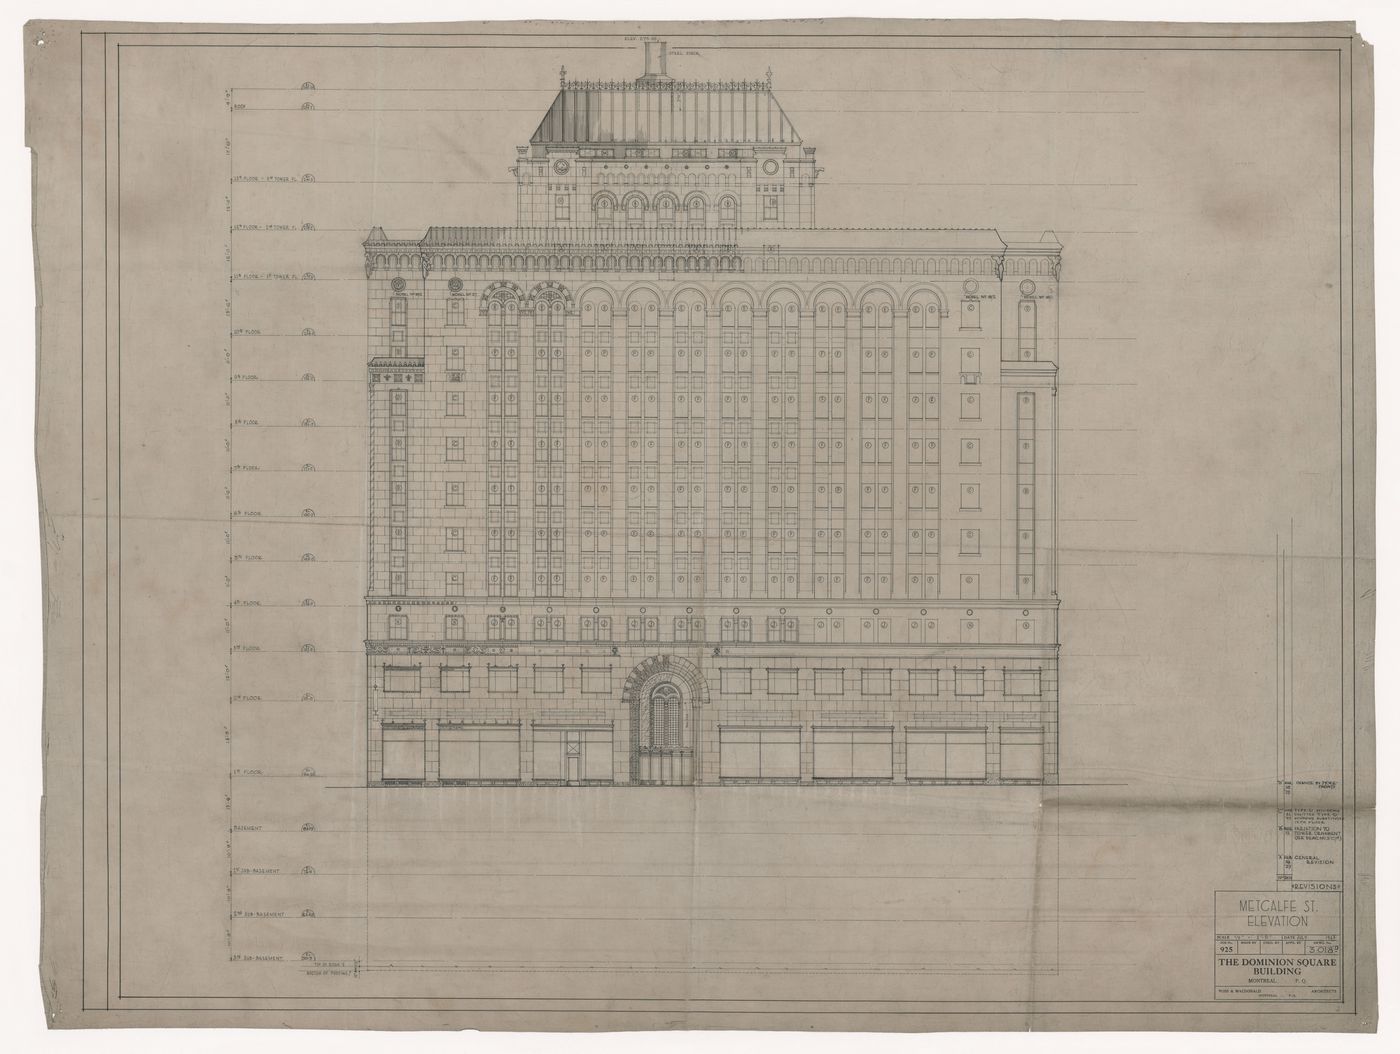 Elevation for Dominion Square Building, Montreal, Québec